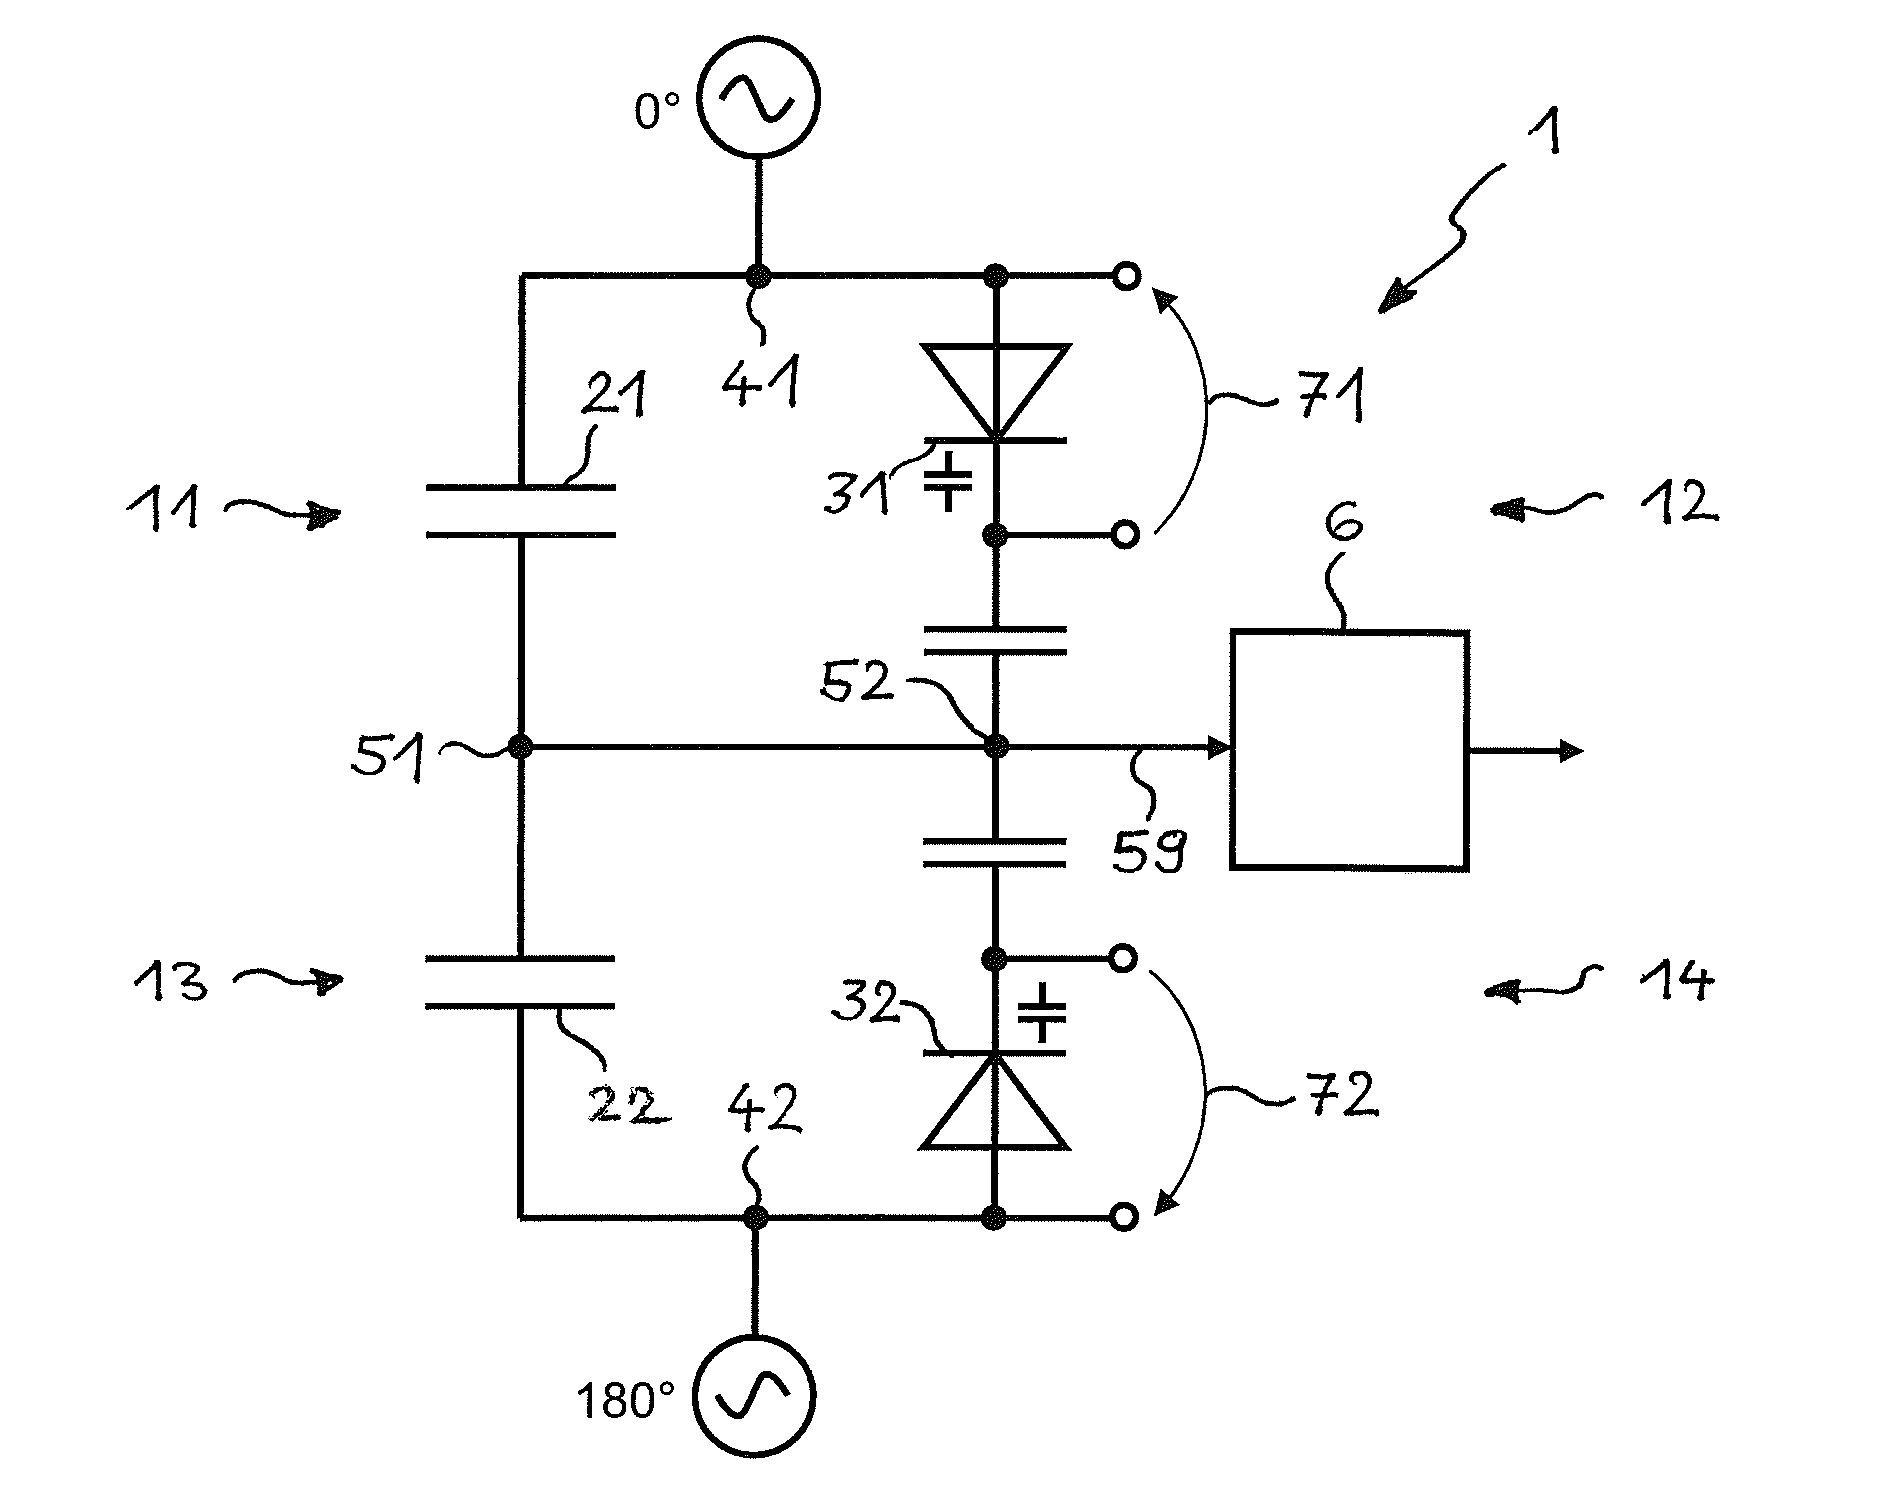 Capacitive Measuring Circuit for Yarn Inspection